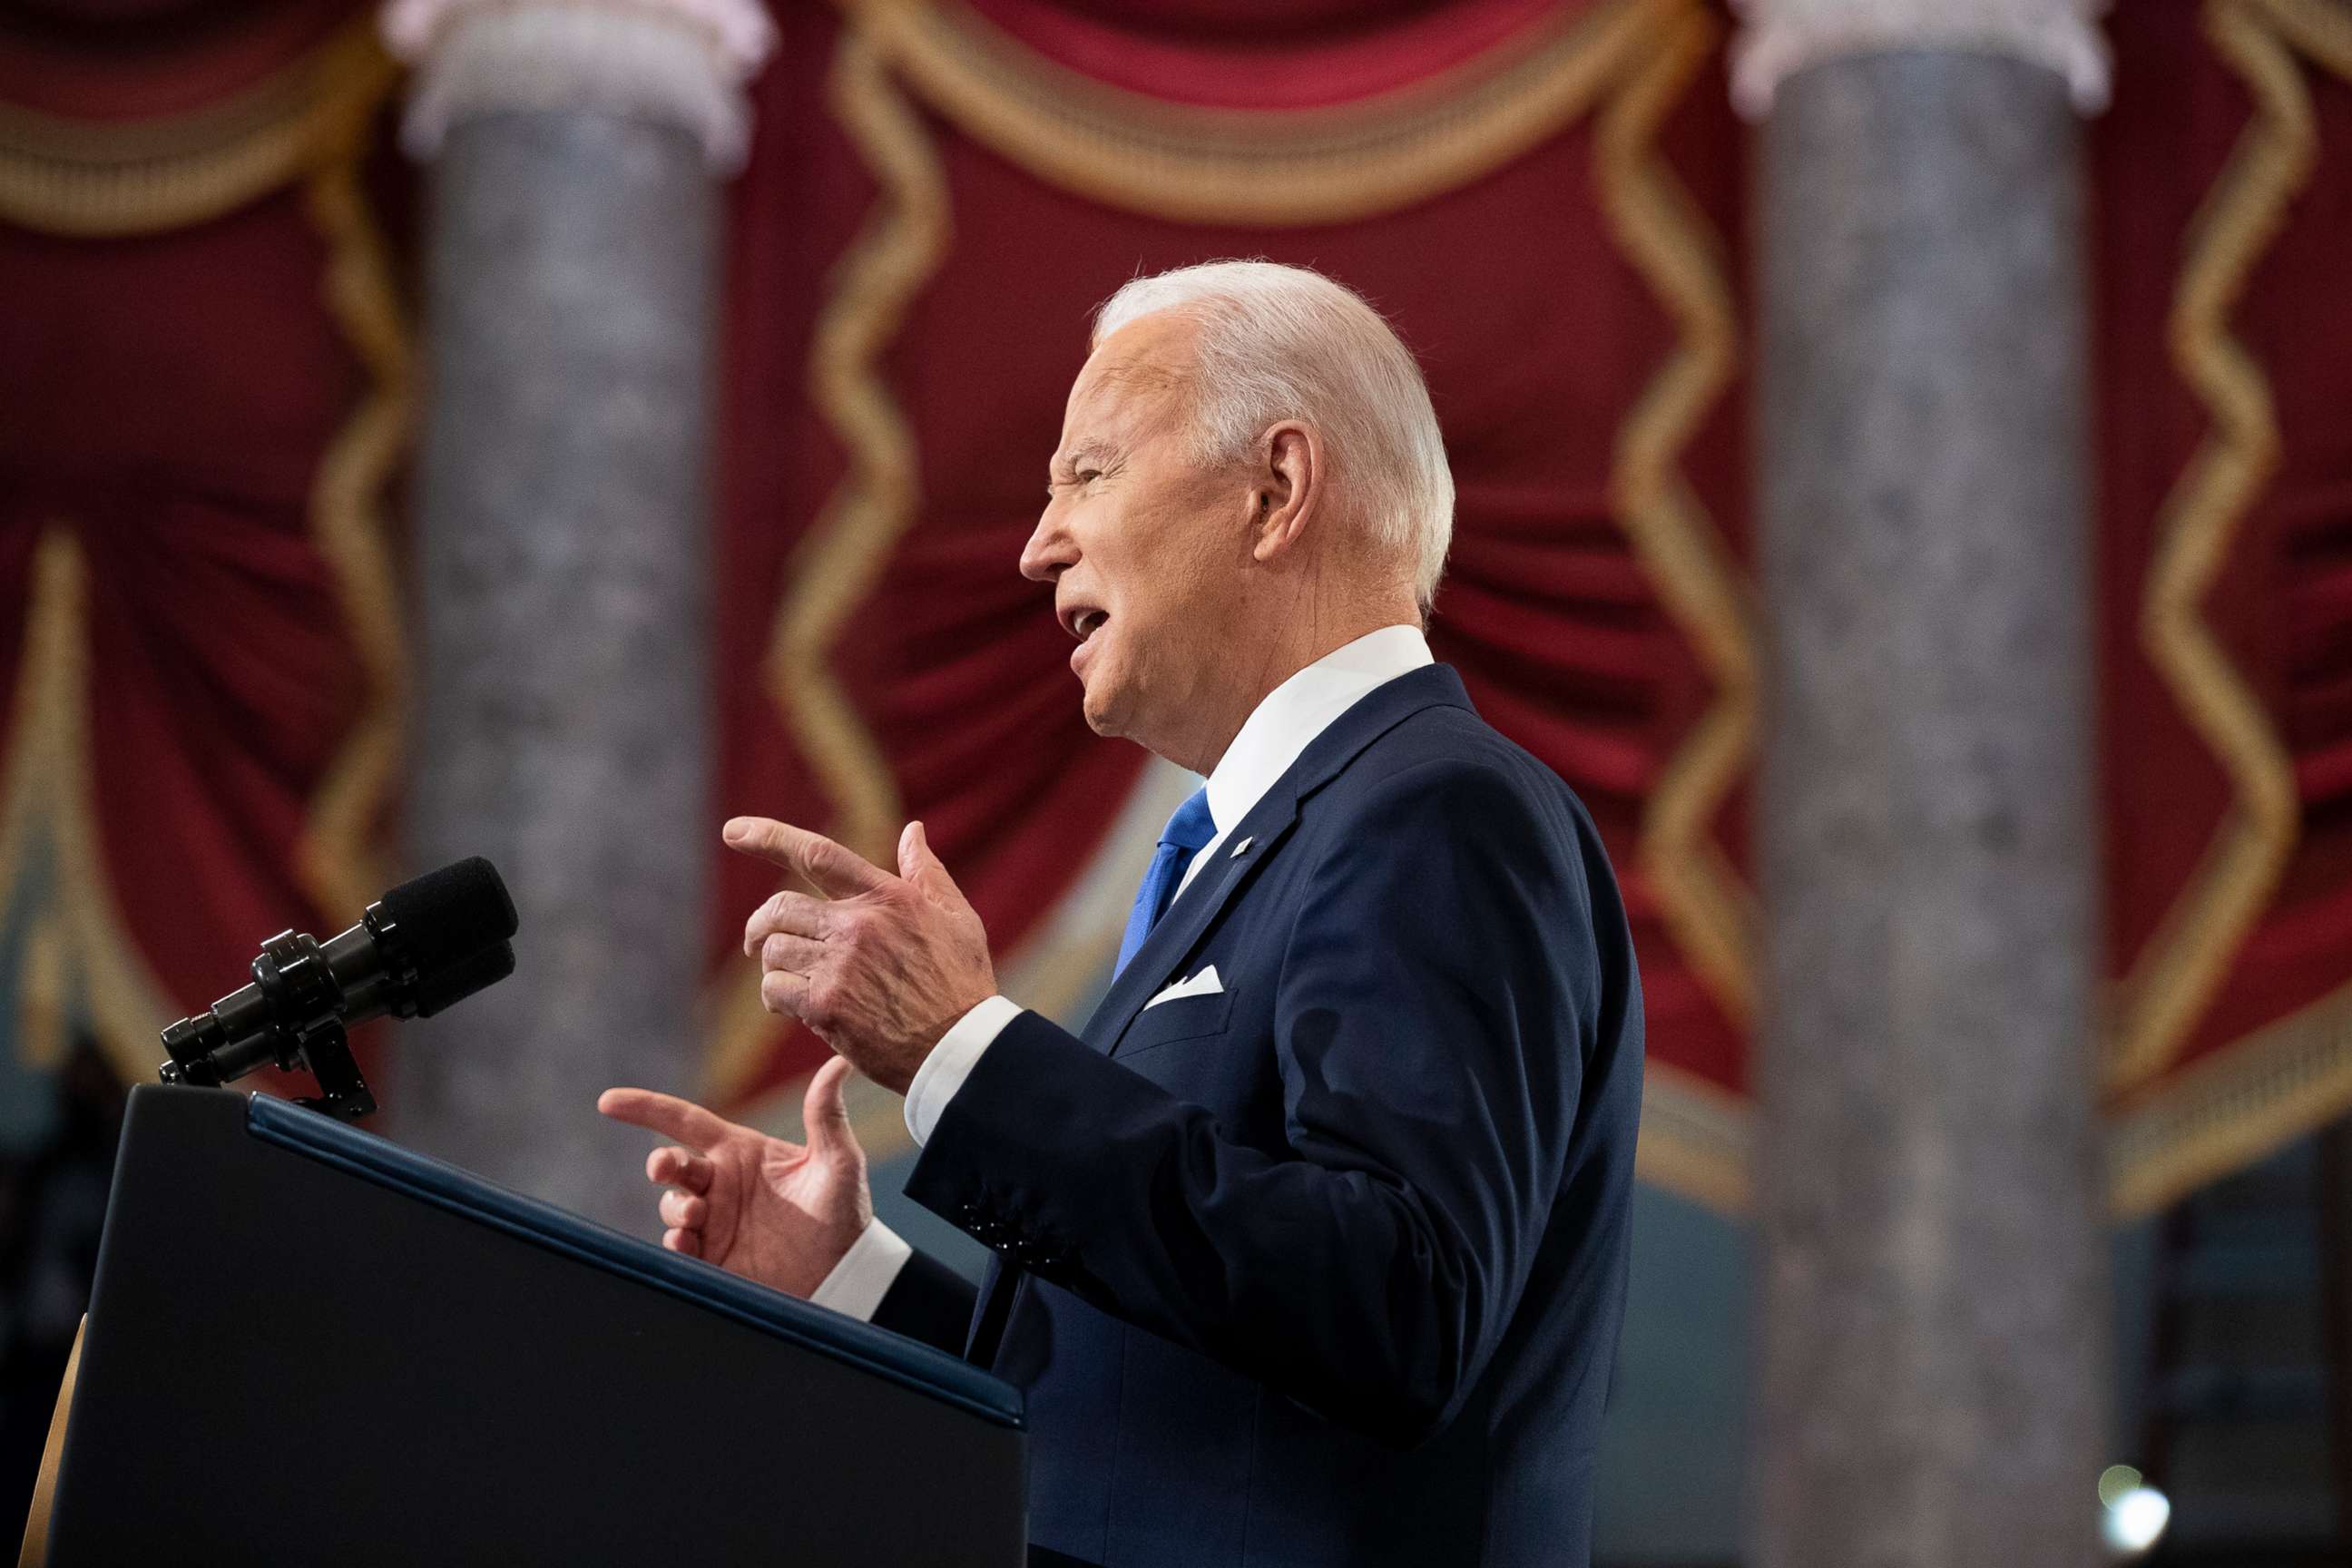 PHOTO: President Joe Biden delivers remarks on the one-year anniversary of the January 6th insurrection at the U.S. Capitol in Washington, Jan.6, 2022.